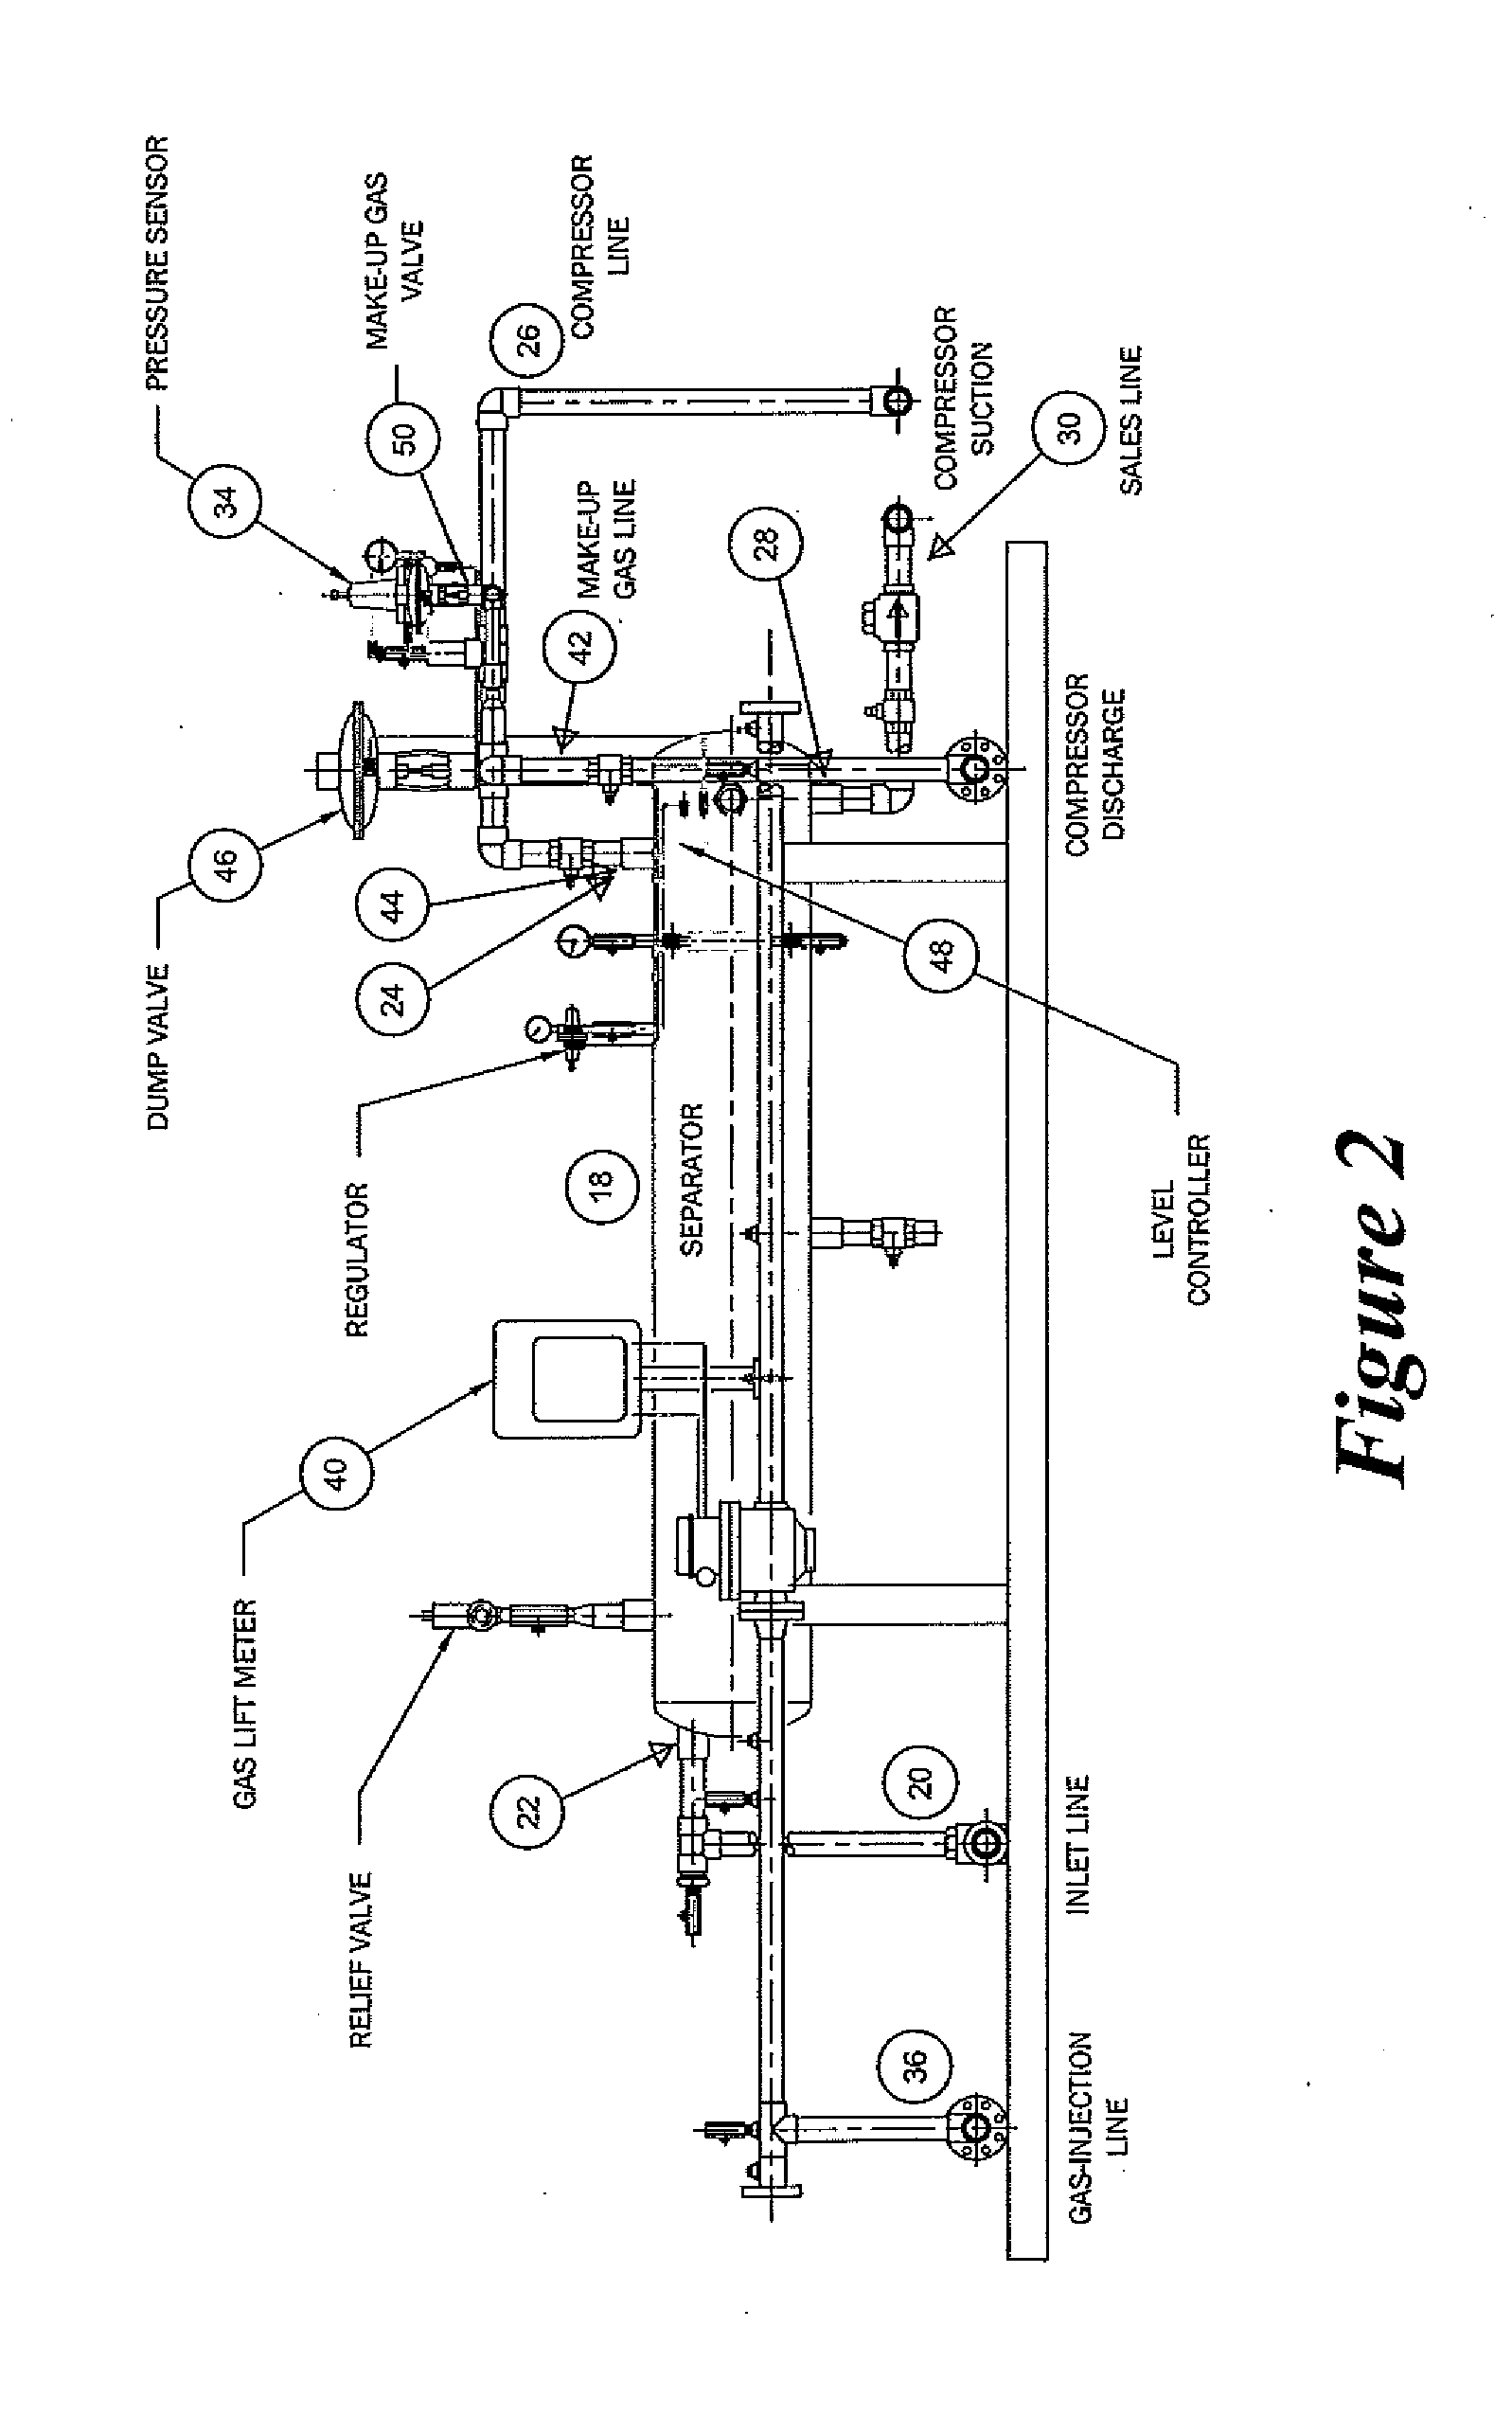 System and Method for Optimizing Production in Gas-Lift Wells